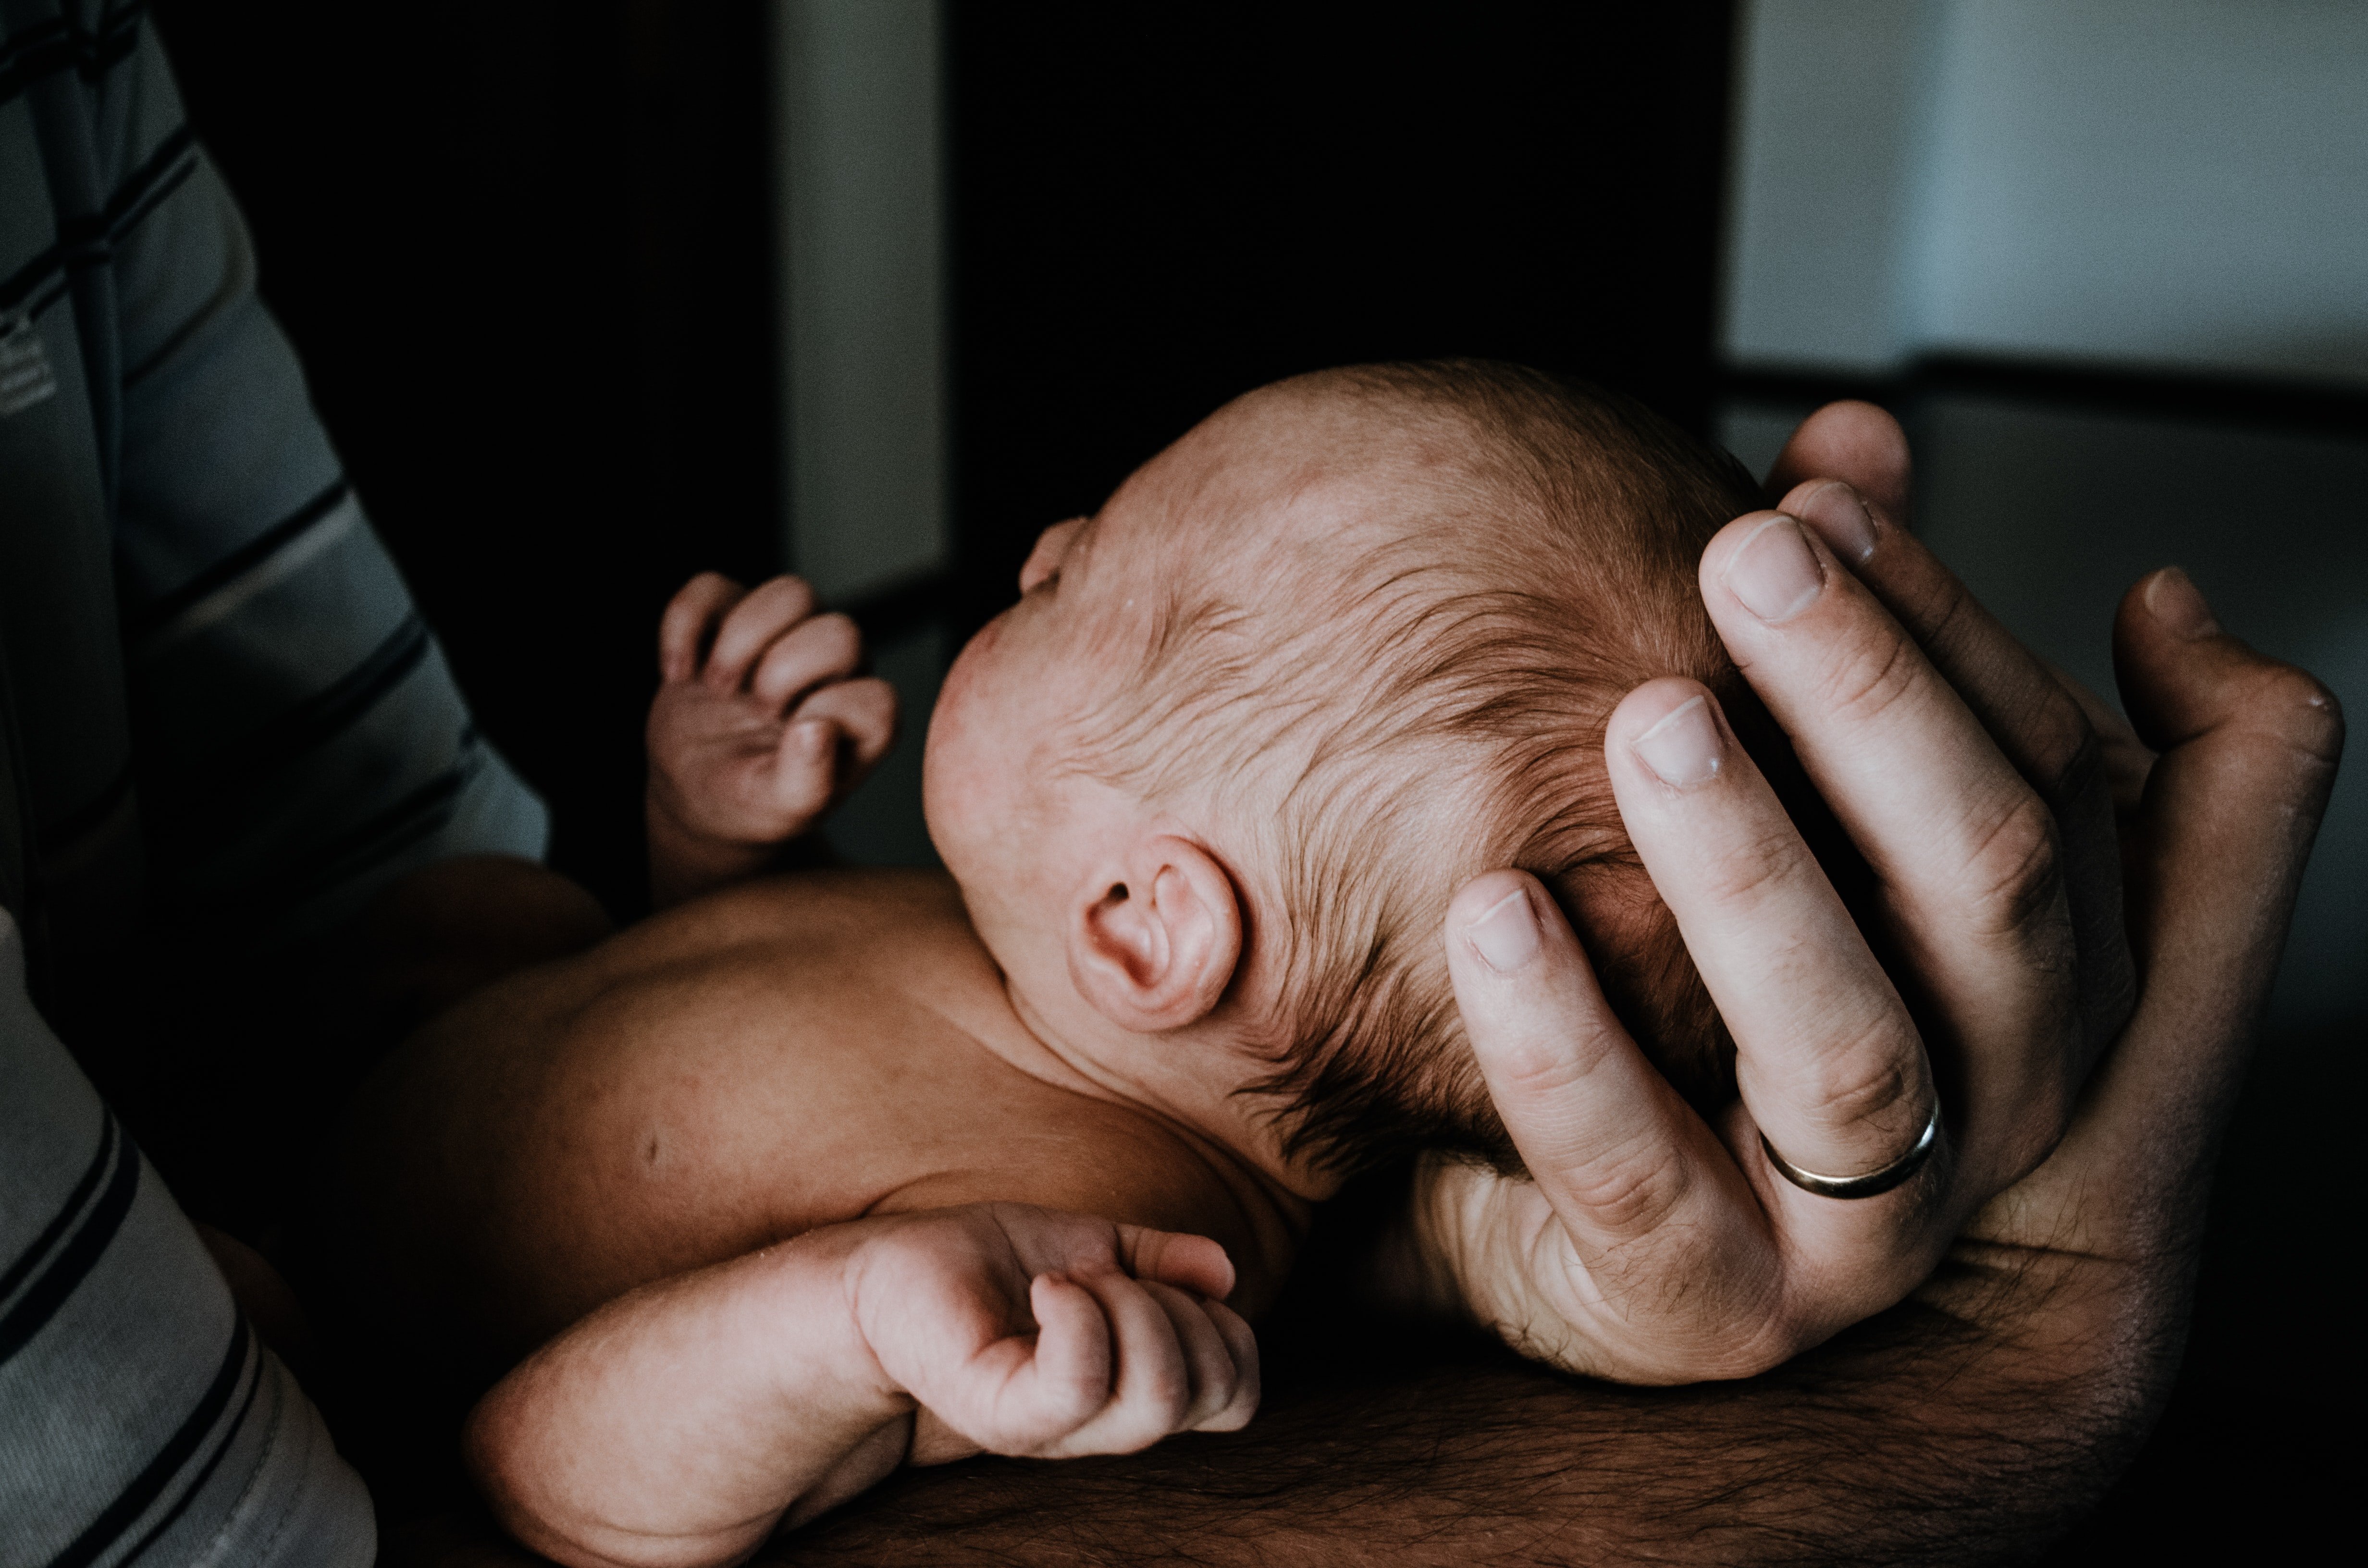 Then man doublted his newborn baby's paternity & refused to sign the birth certificate | Source: Unsplash